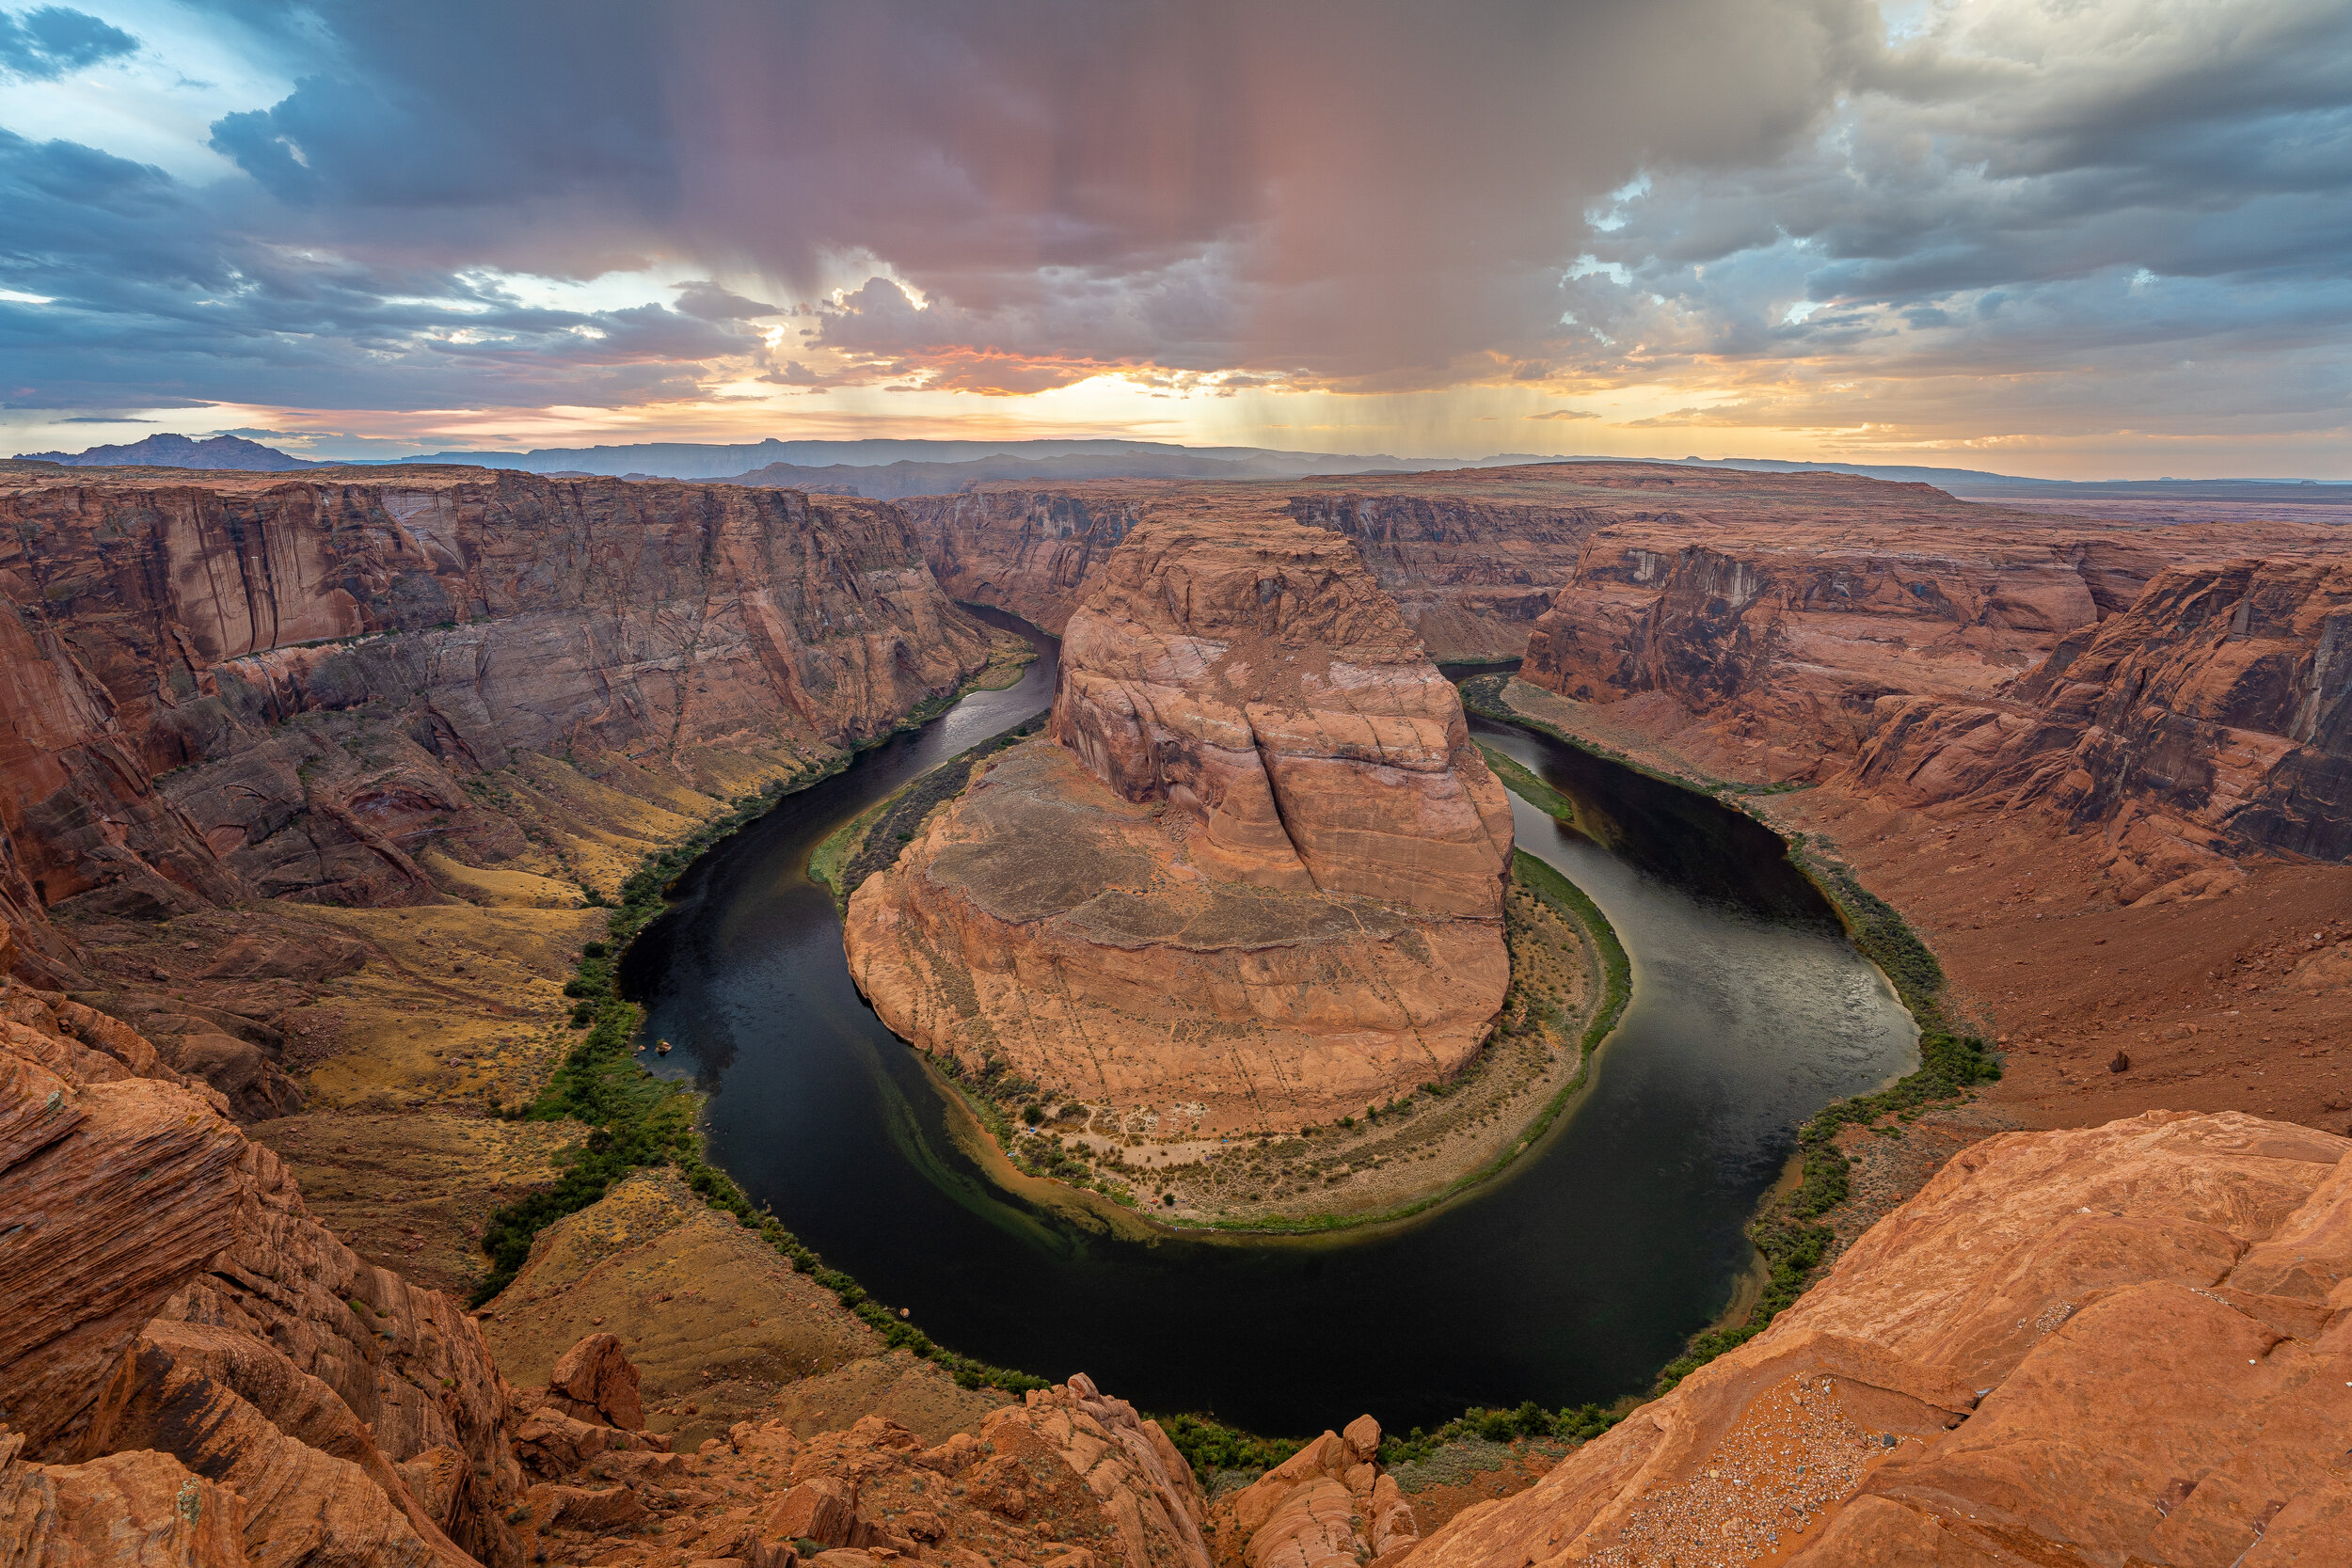  For anyone who has never been to  Horseshoe Bend in Page, Arizona , the circular, “horseshoe” route of the Colorado River is much bigger than it looks in photographs. Kayakers 1,000 feet down look like tiny toothpicks from the top rim. A storm was b